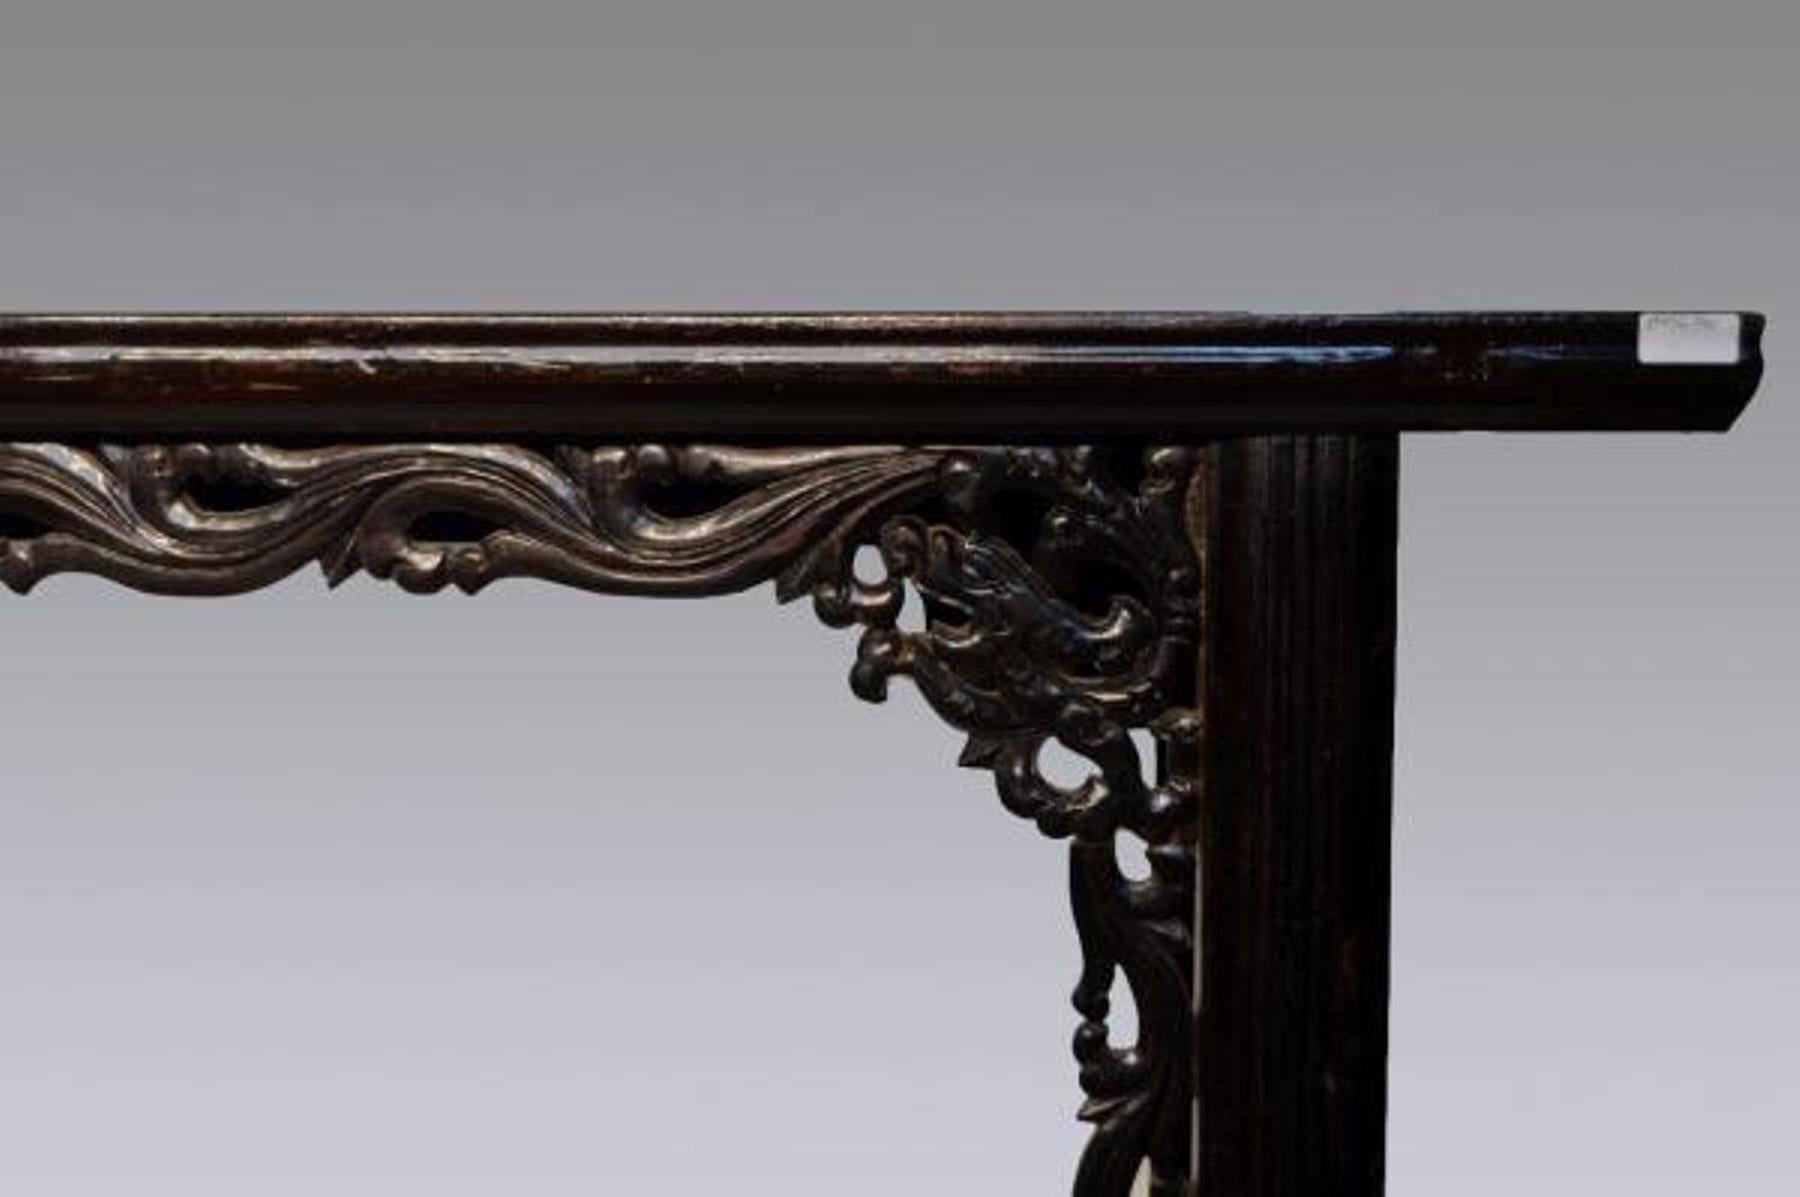 Chinese Antique Dark Lacquer Console Table with Molding from China in the 1800s